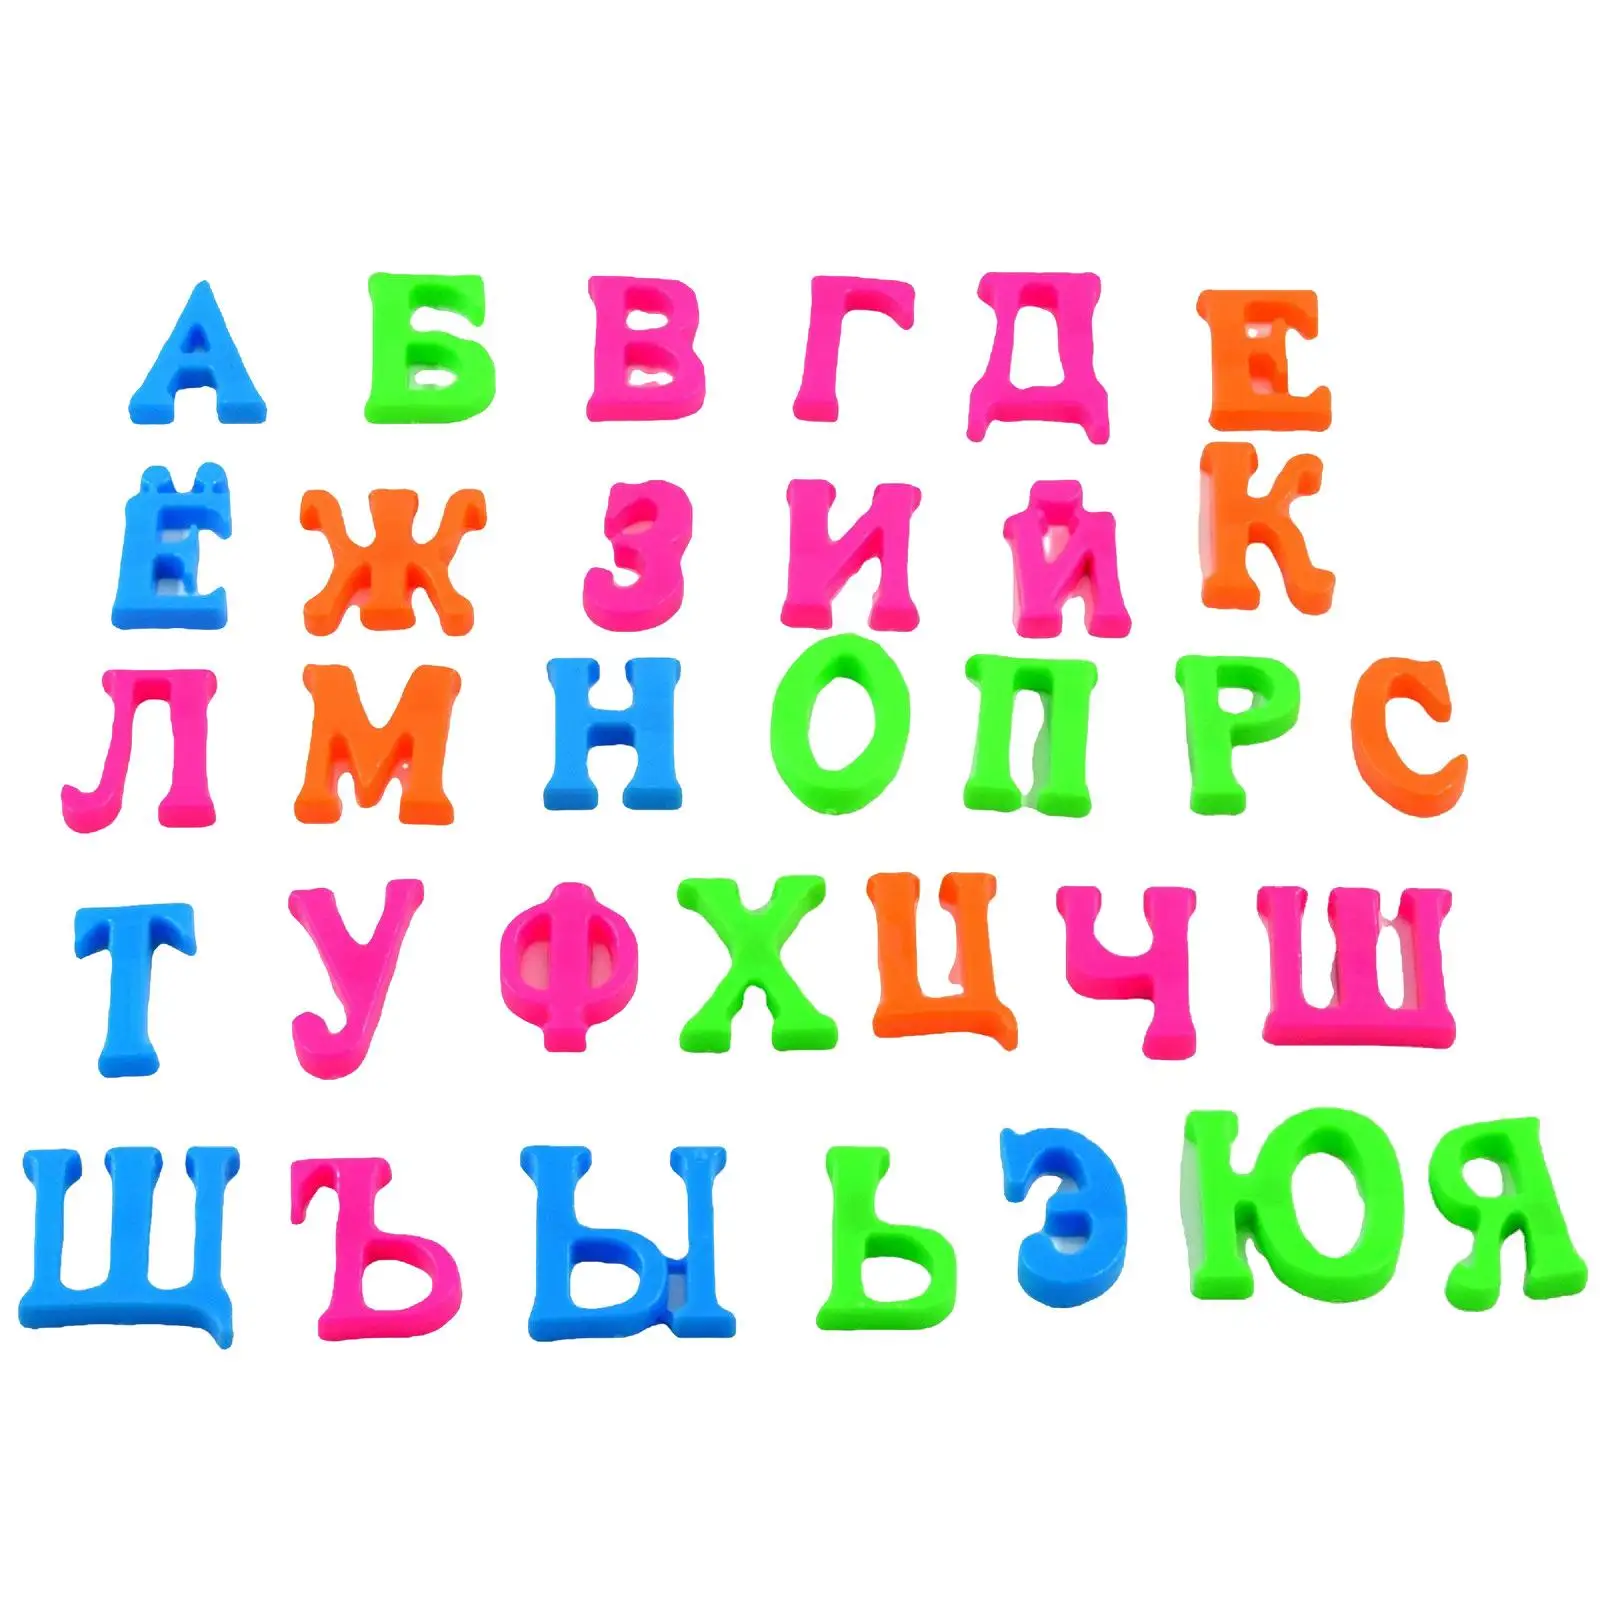 

Russian Letters Magnetical Toys 1 Set Refrigerator Stickers for Baby Kindergarten Kids